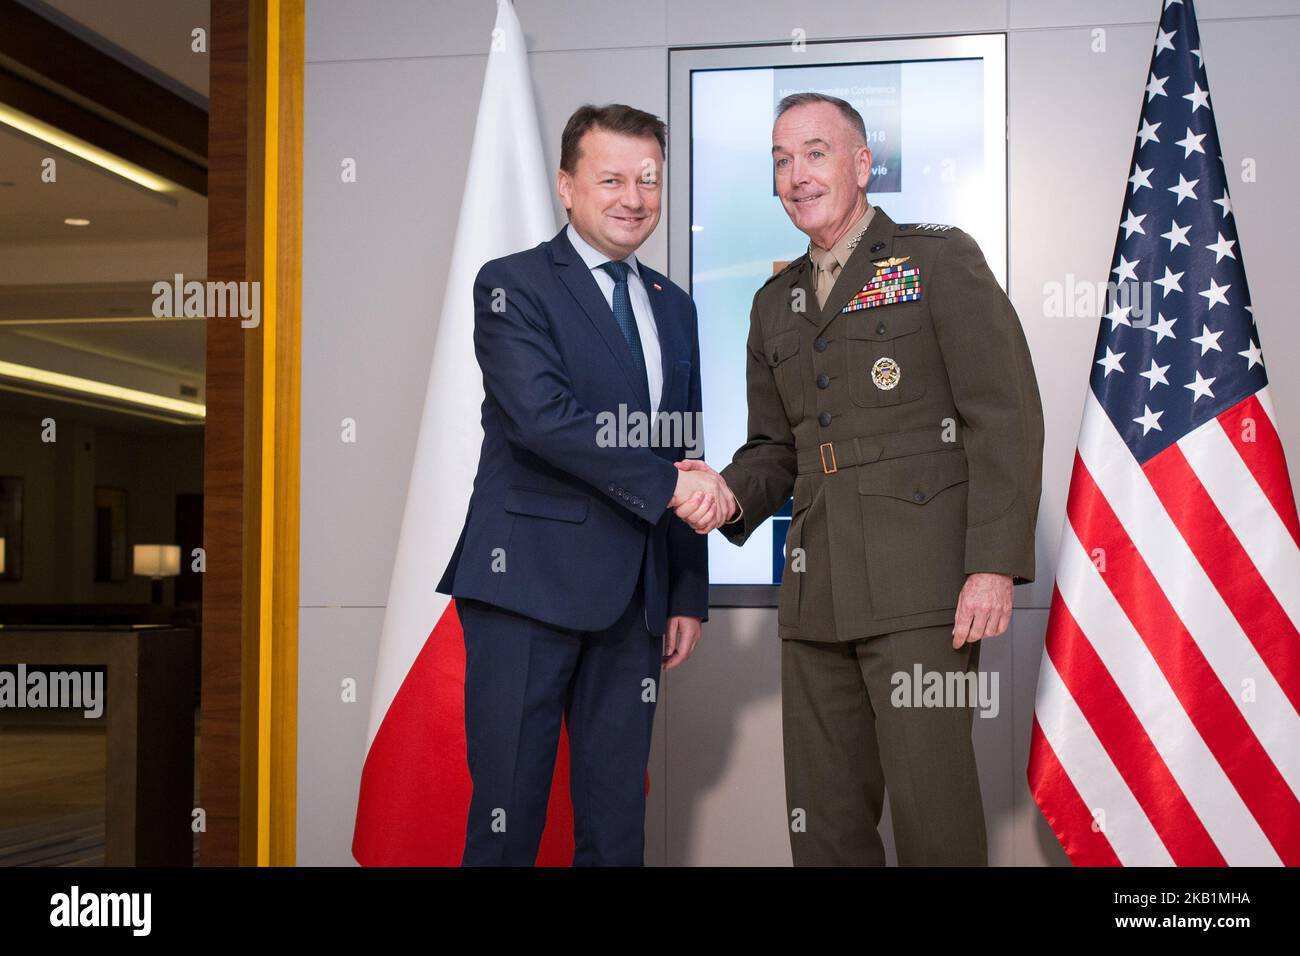 Chairman of the Joint Chiefs of Staff (highest-ranking military officer in the US Army) Joseph Dunford (R) and Poland's Defense Minister Mariusz Blaszczak (L) met during the NATO Military Committee Conference at Double Tree by Hilton hotel in Warsaw, Poland on 29 September 2018 (Photo by Mateusz Wlodarczyk/NurPhoto) Stock Photo